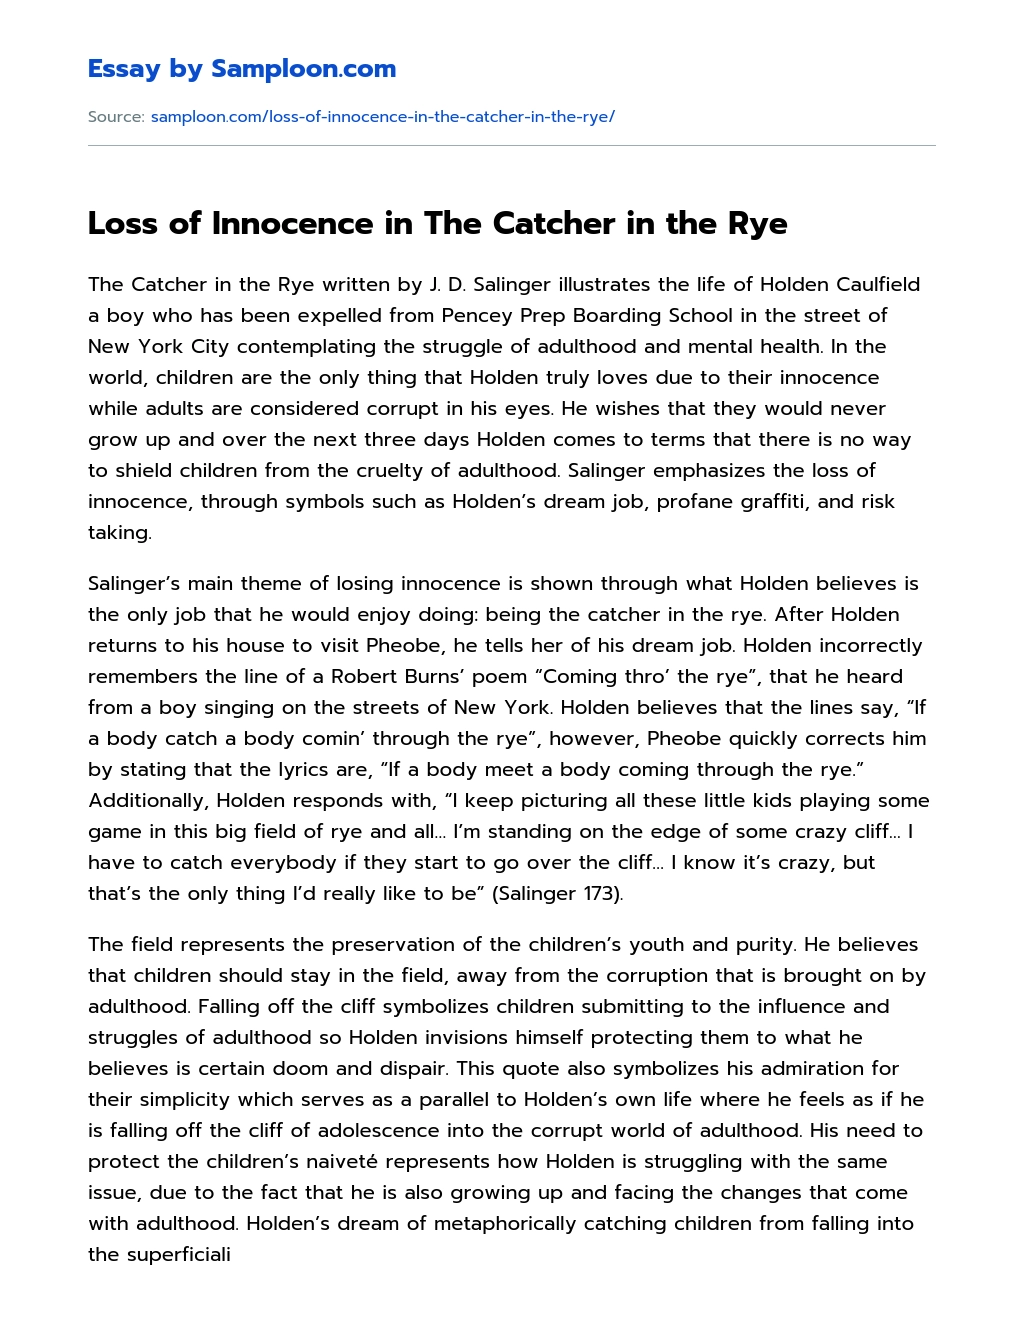 Loss of Innocence in The Catcher in the Rye essay